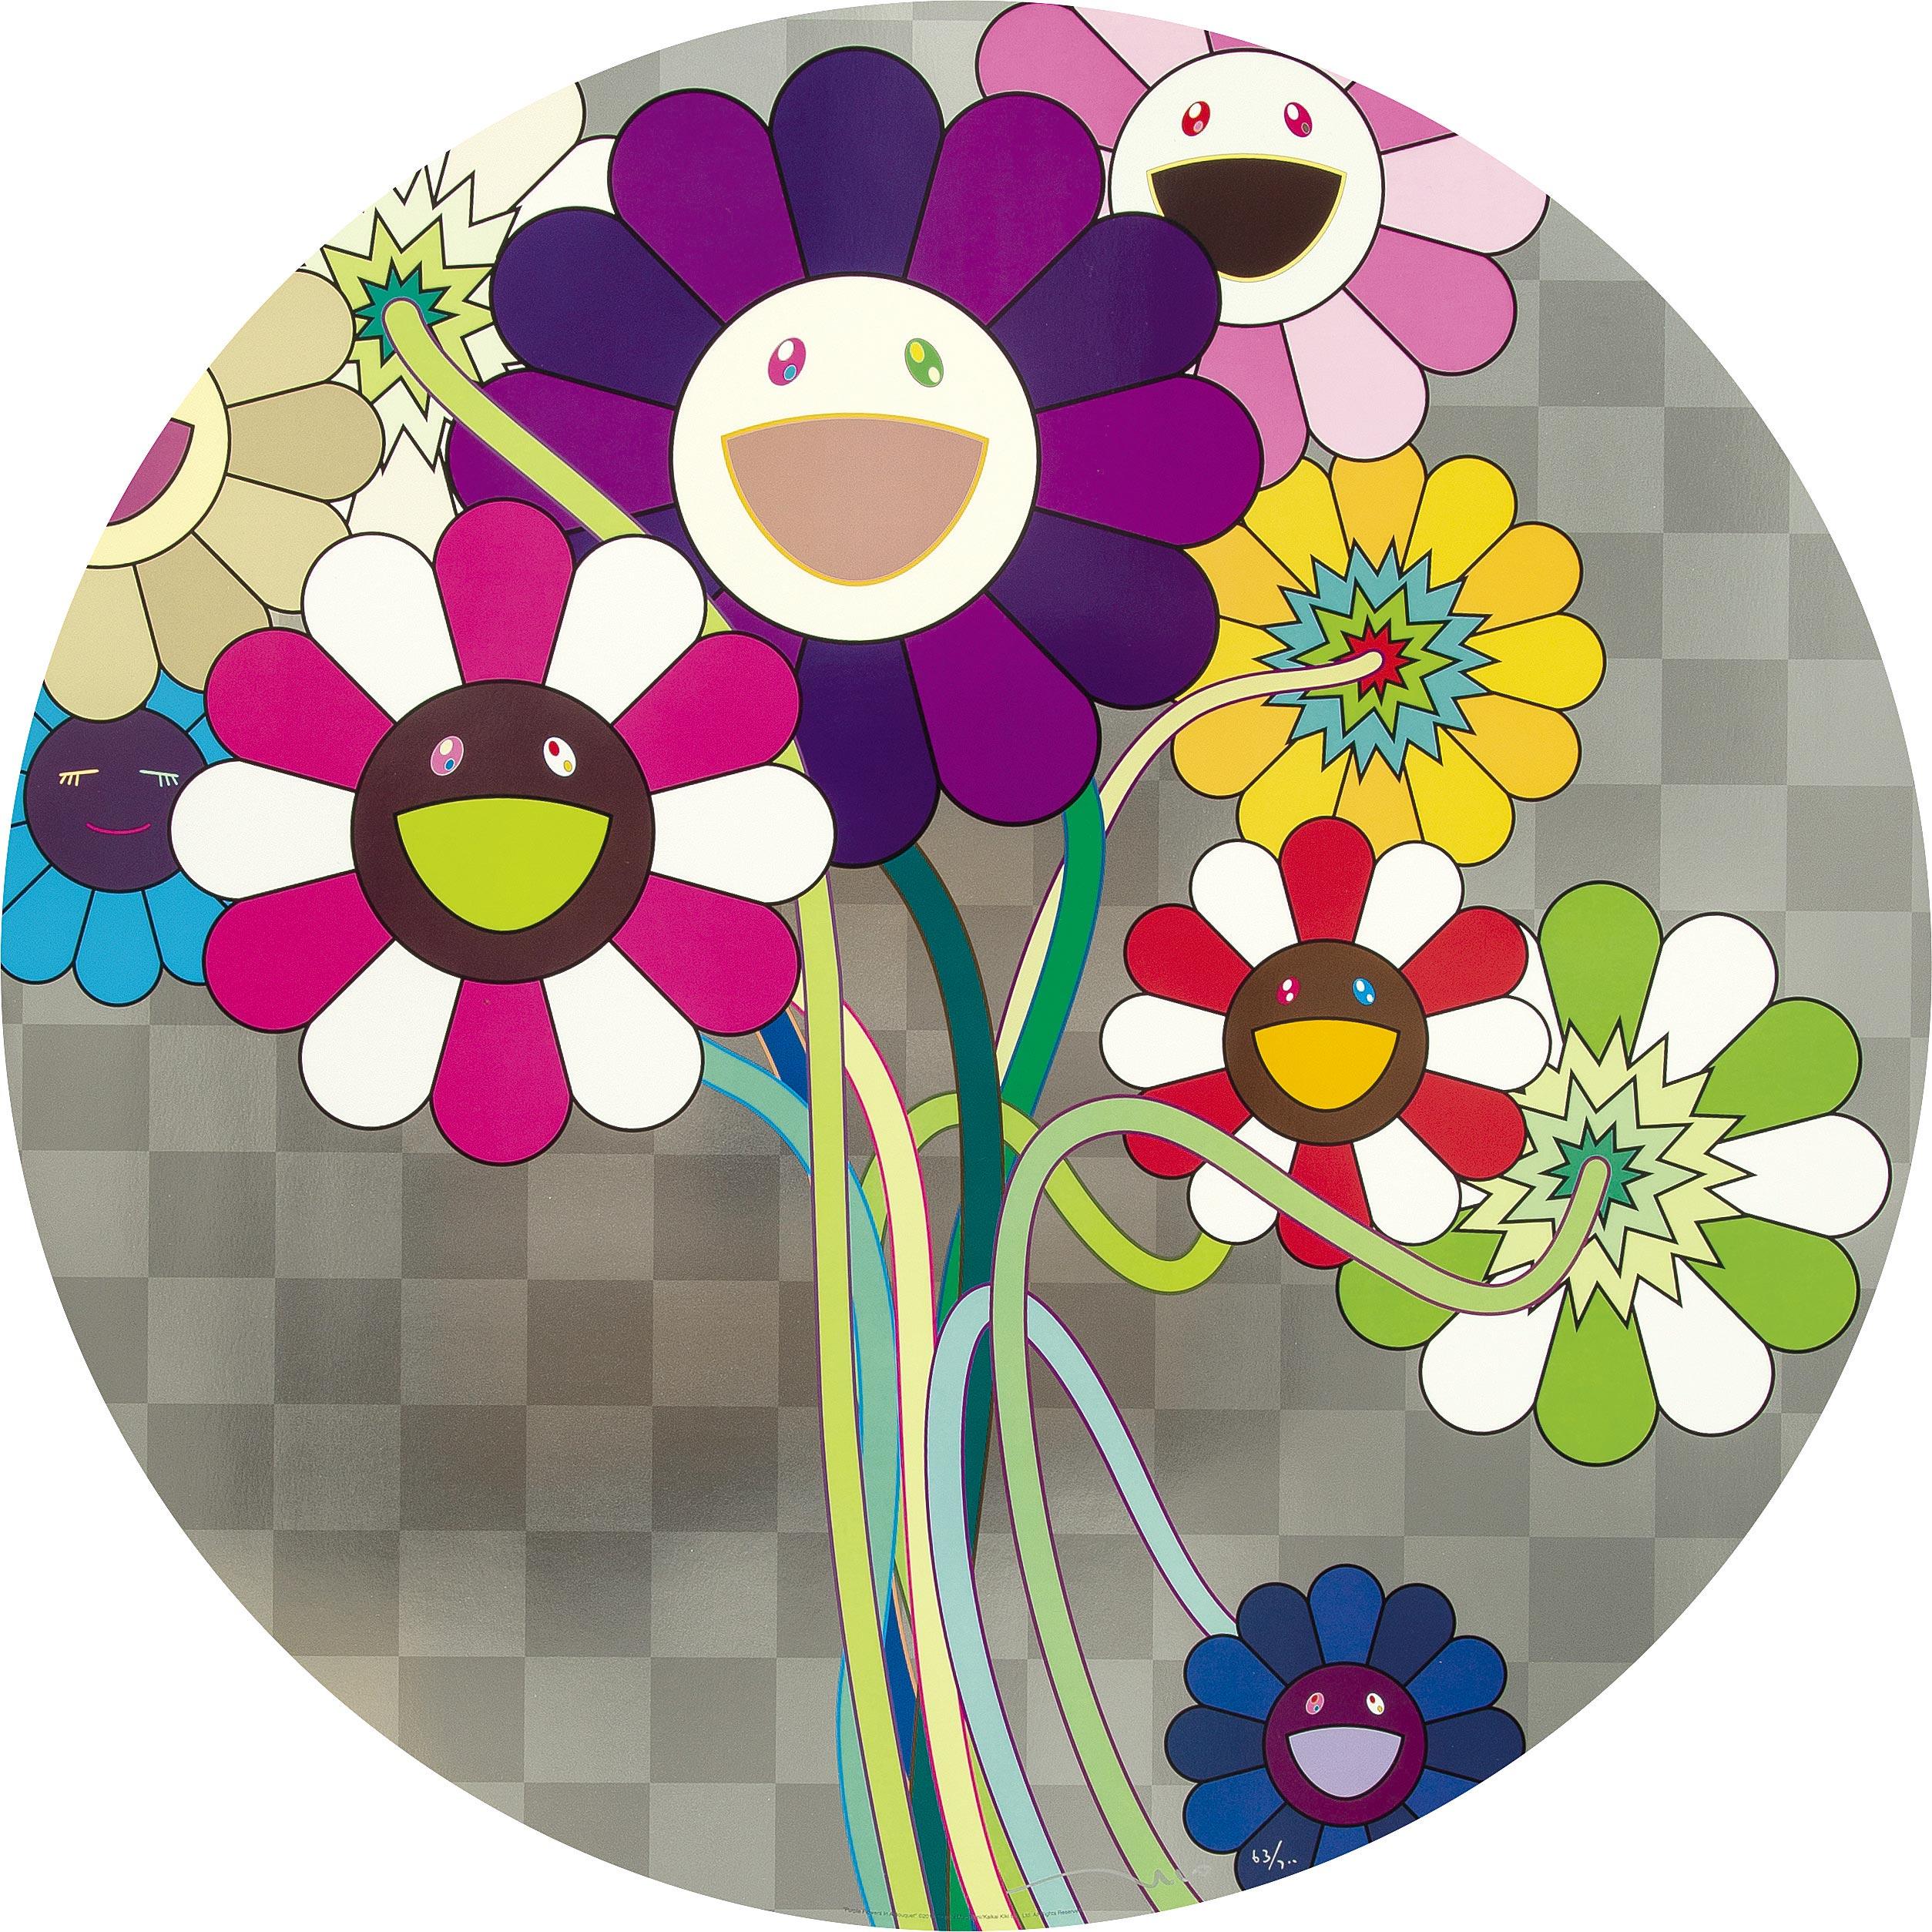 Purple flowers in a bouquet (2010) by Takashi Murakami
Woven paper offset print, cold foil stamp, glossy varnish
Published by Kaikai Kiki Co., Ltd., Tokyo
28 in diameter
71 cm diameter
Edition 63/300

Takashi Murakami is best known for his